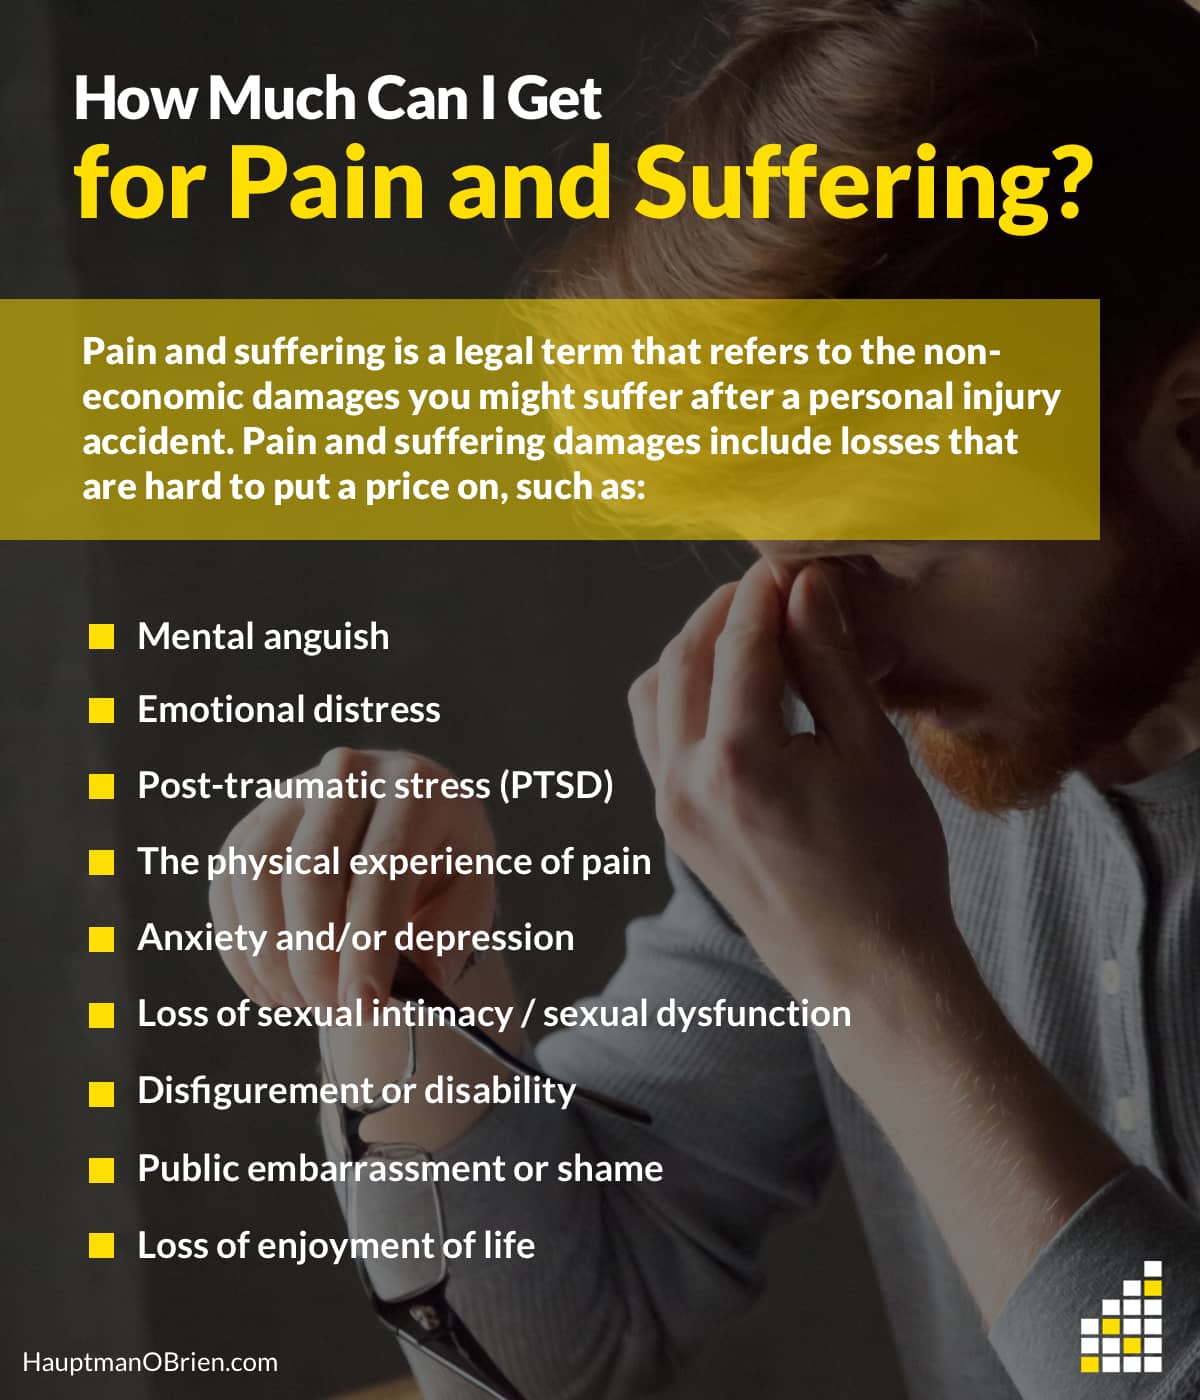 How Much Can I Get for Pain and Suffering?